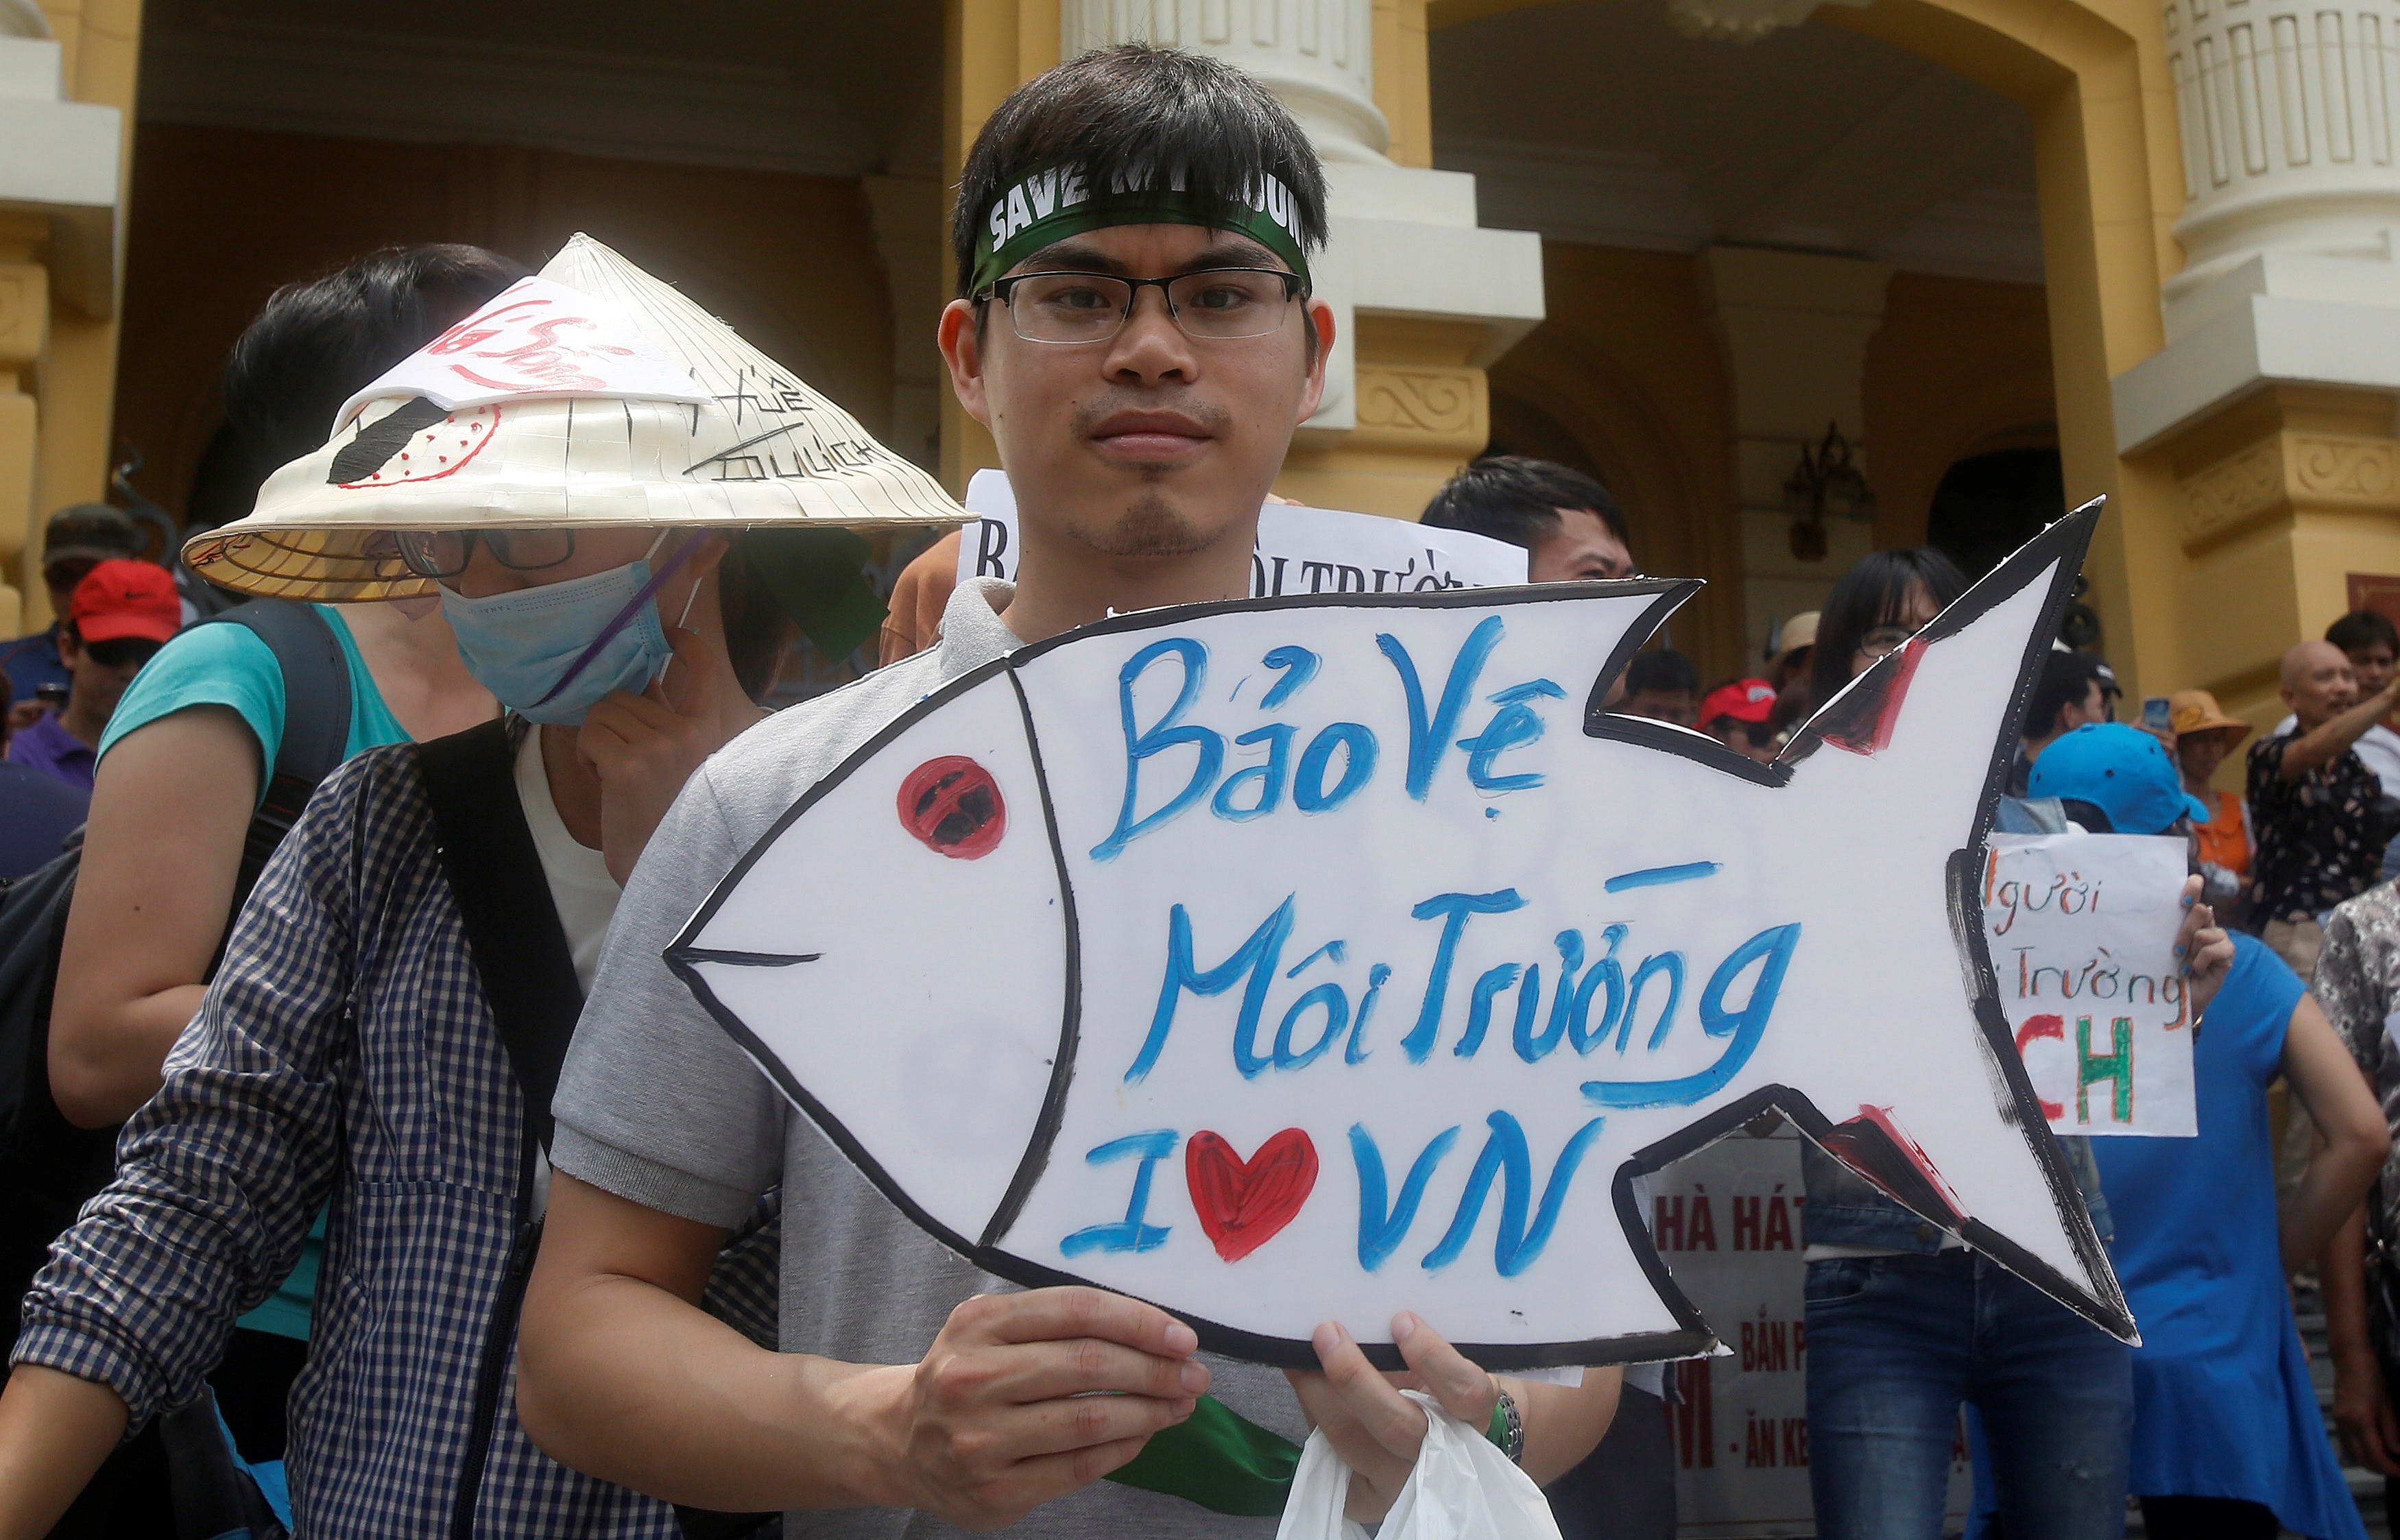 A demonstrator holds a sign during a protest where they say they are demanding cleaner waters in the central regions after mass fish deaths in recent weeks, in Hanoi, Vietnam